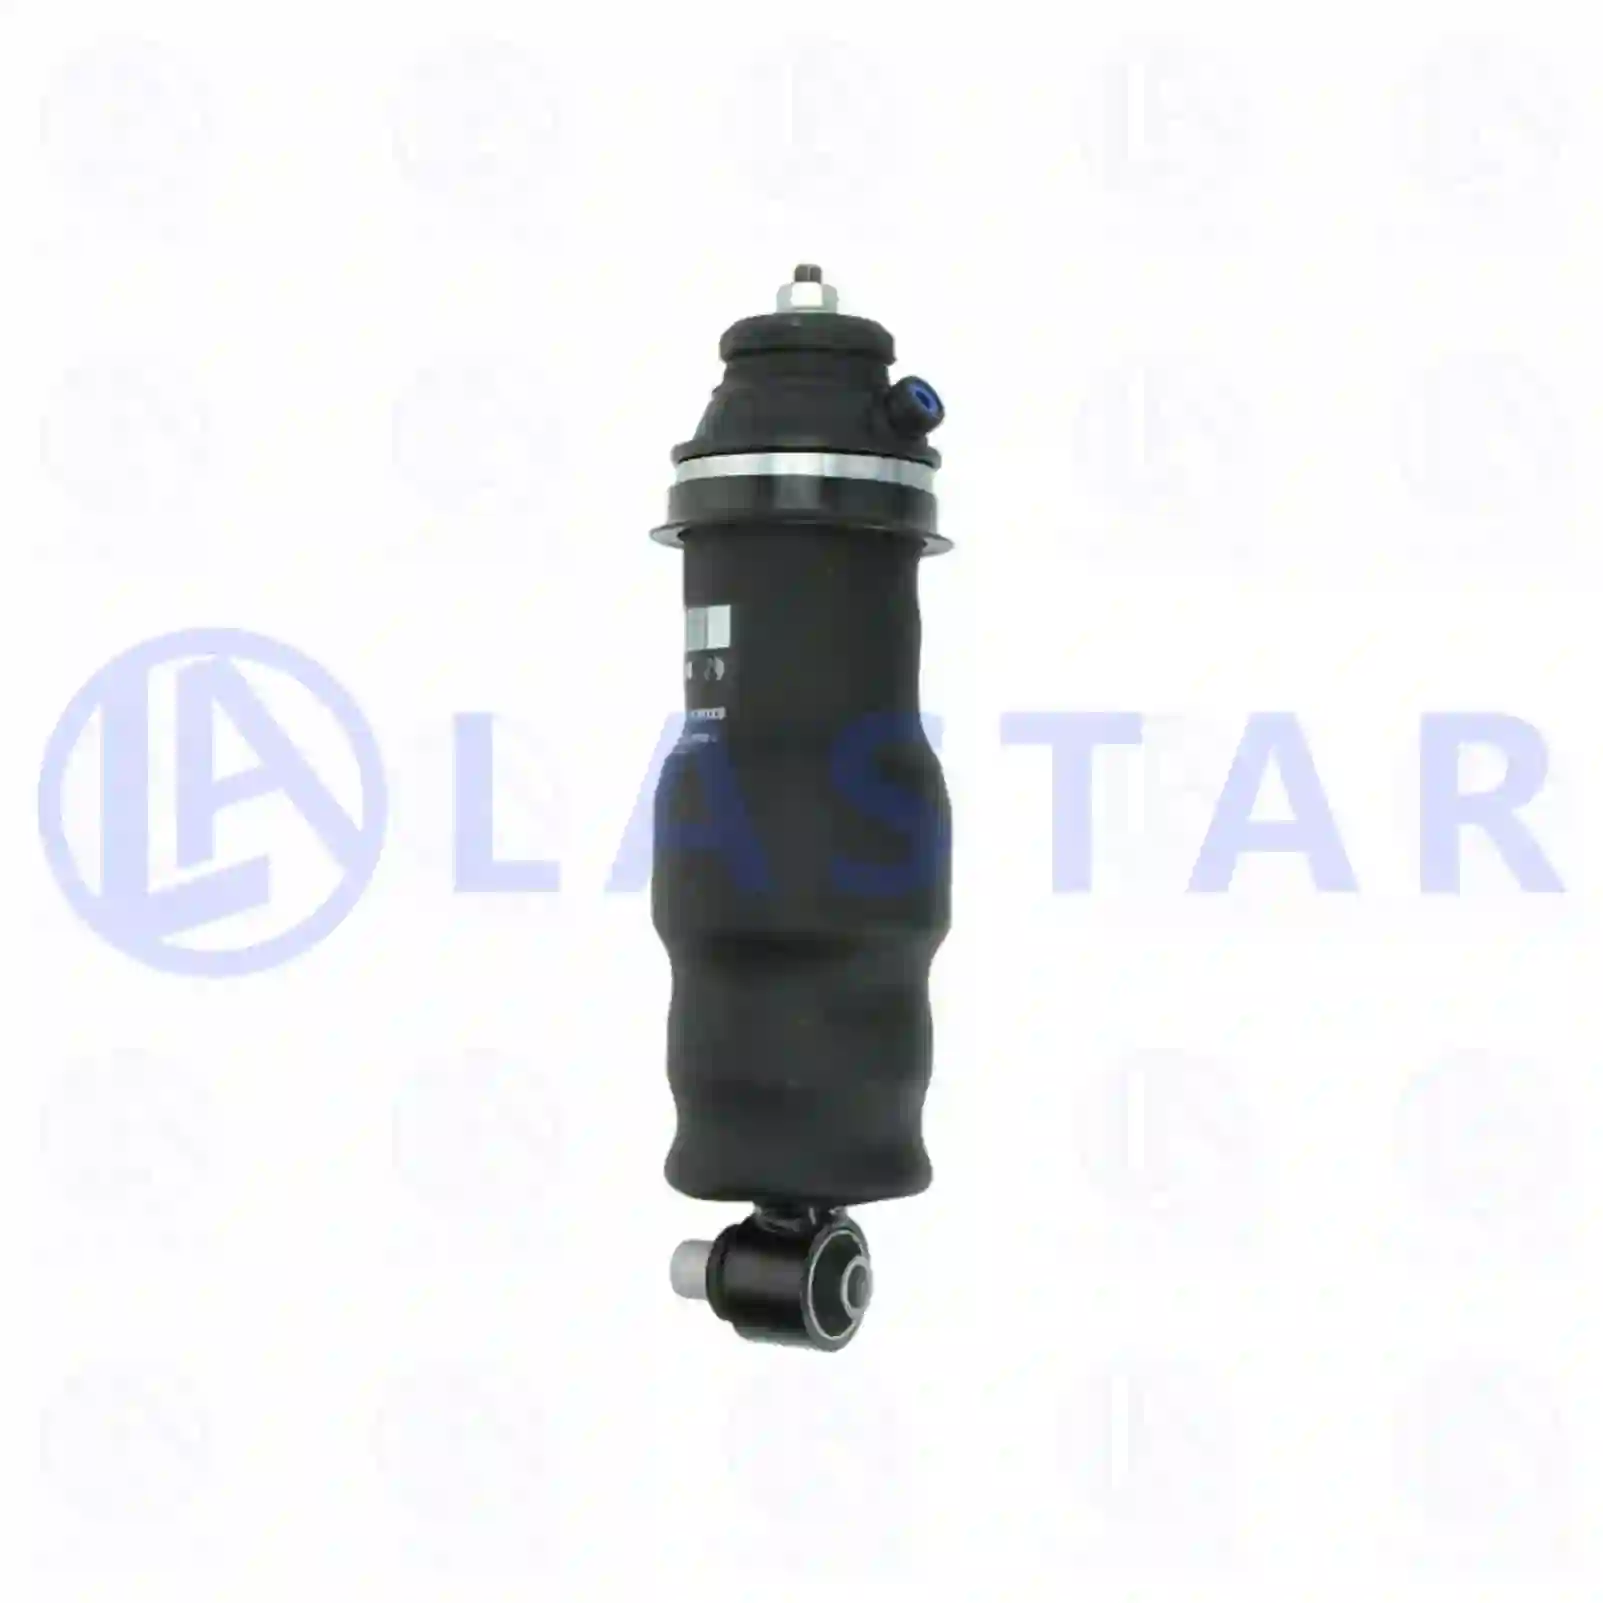 Cabin shock absorber, with air bellow, 77729576, 7421430899, 21170611, 22040662, ||  77729576 Lastar Spare Part | Truck Spare Parts, Auotomotive Spare Parts Cabin shock absorber, with air bellow, 77729576, 7421430899, 21170611, 22040662, ||  77729576 Lastar Spare Part | Truck Spare Parts, Auotomotive Spare Parts